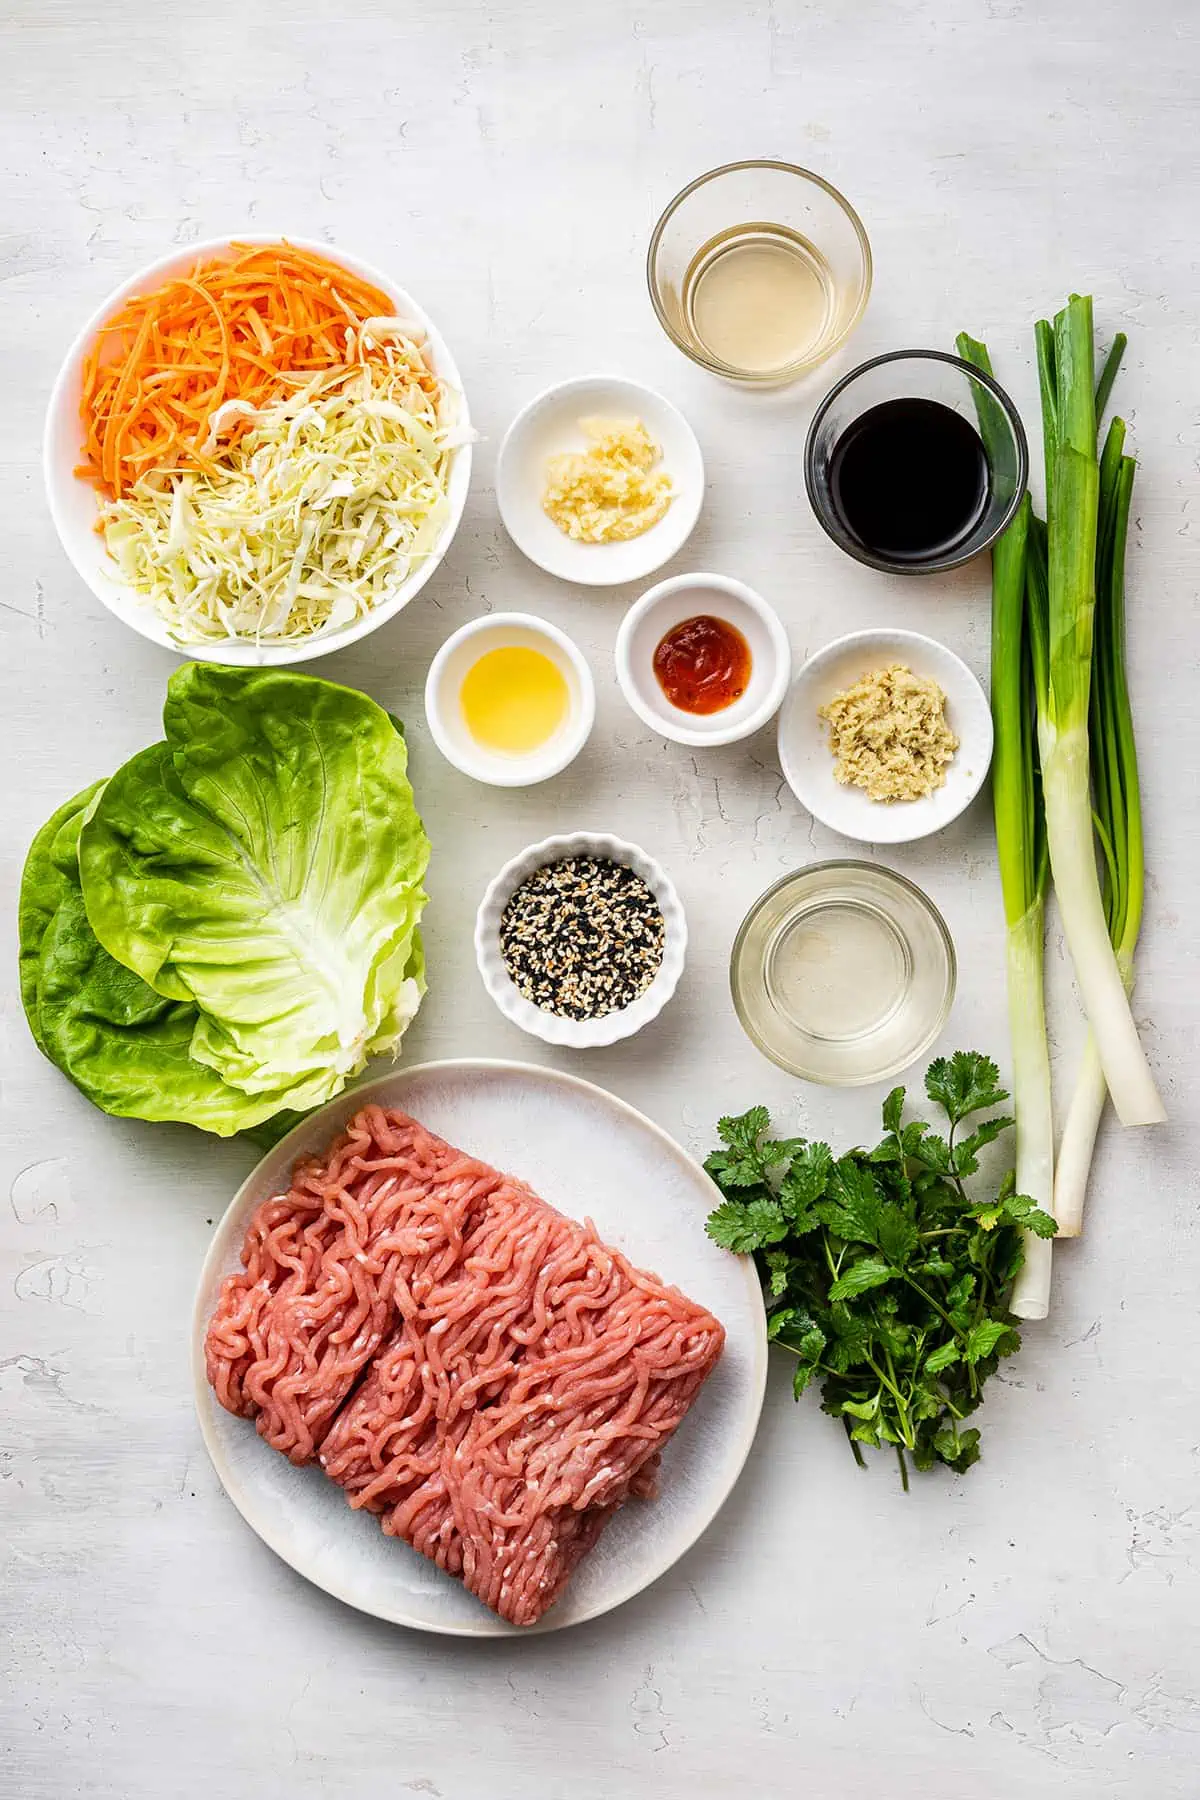 Overhead view of the ingredients needed for chicken lettuce wraps: a plate of raw, ground chicken, a bowl of chopped cabbage and lettuce, four scallions, a bunch of cilantro, some lettuce leaves, and bowls of soy sauce, garlic, ginger, sesame oil, sriracha, rice vinegar, oil, and sesame seeds